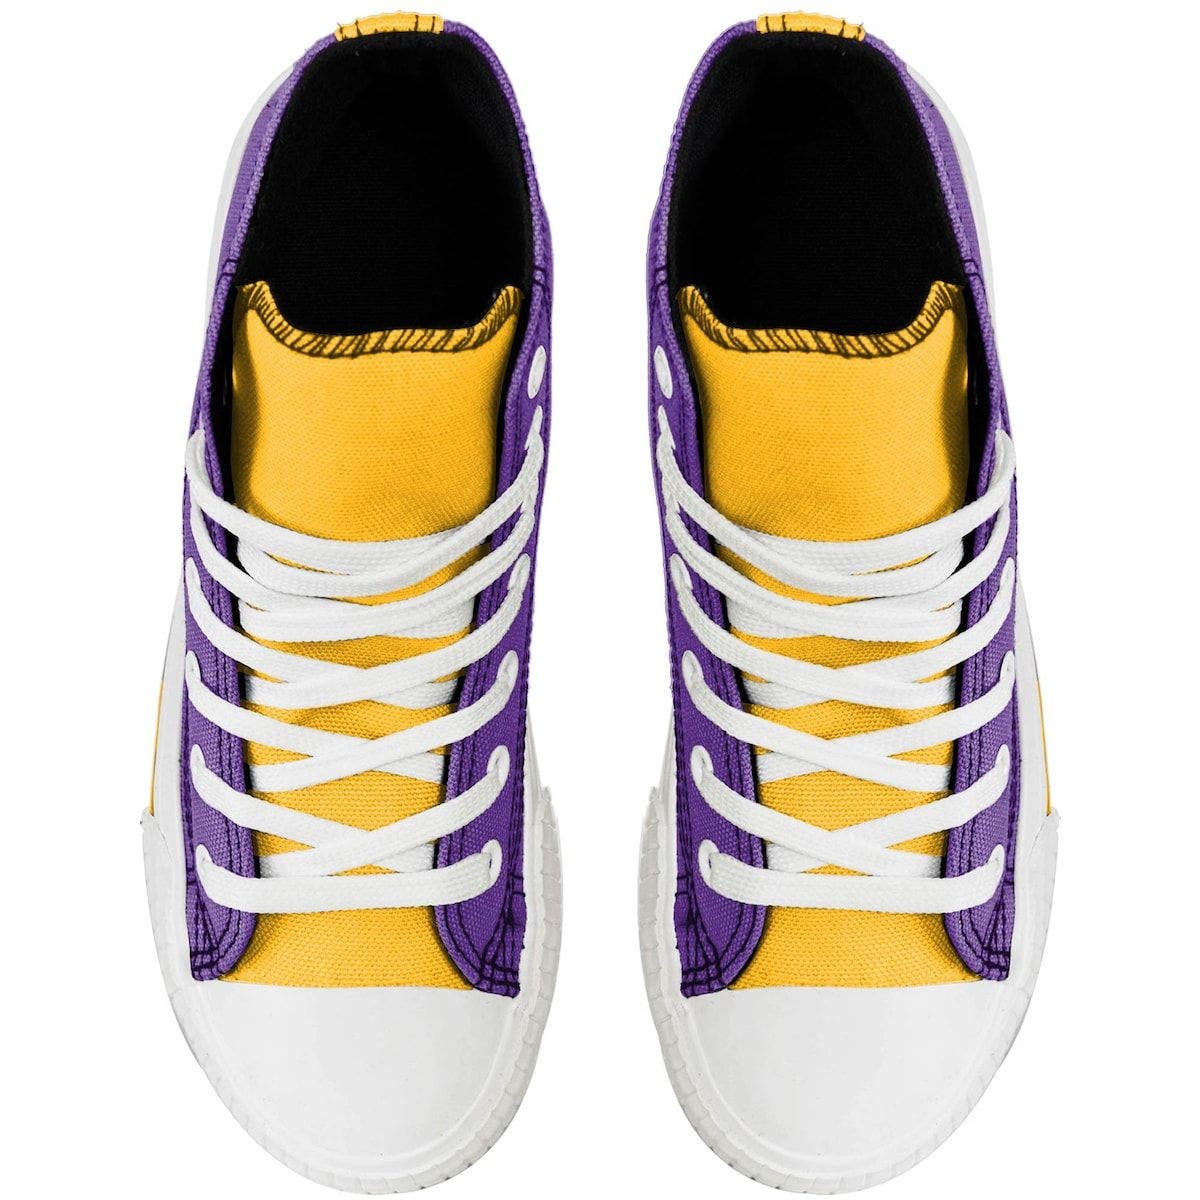 lsu youth shoes